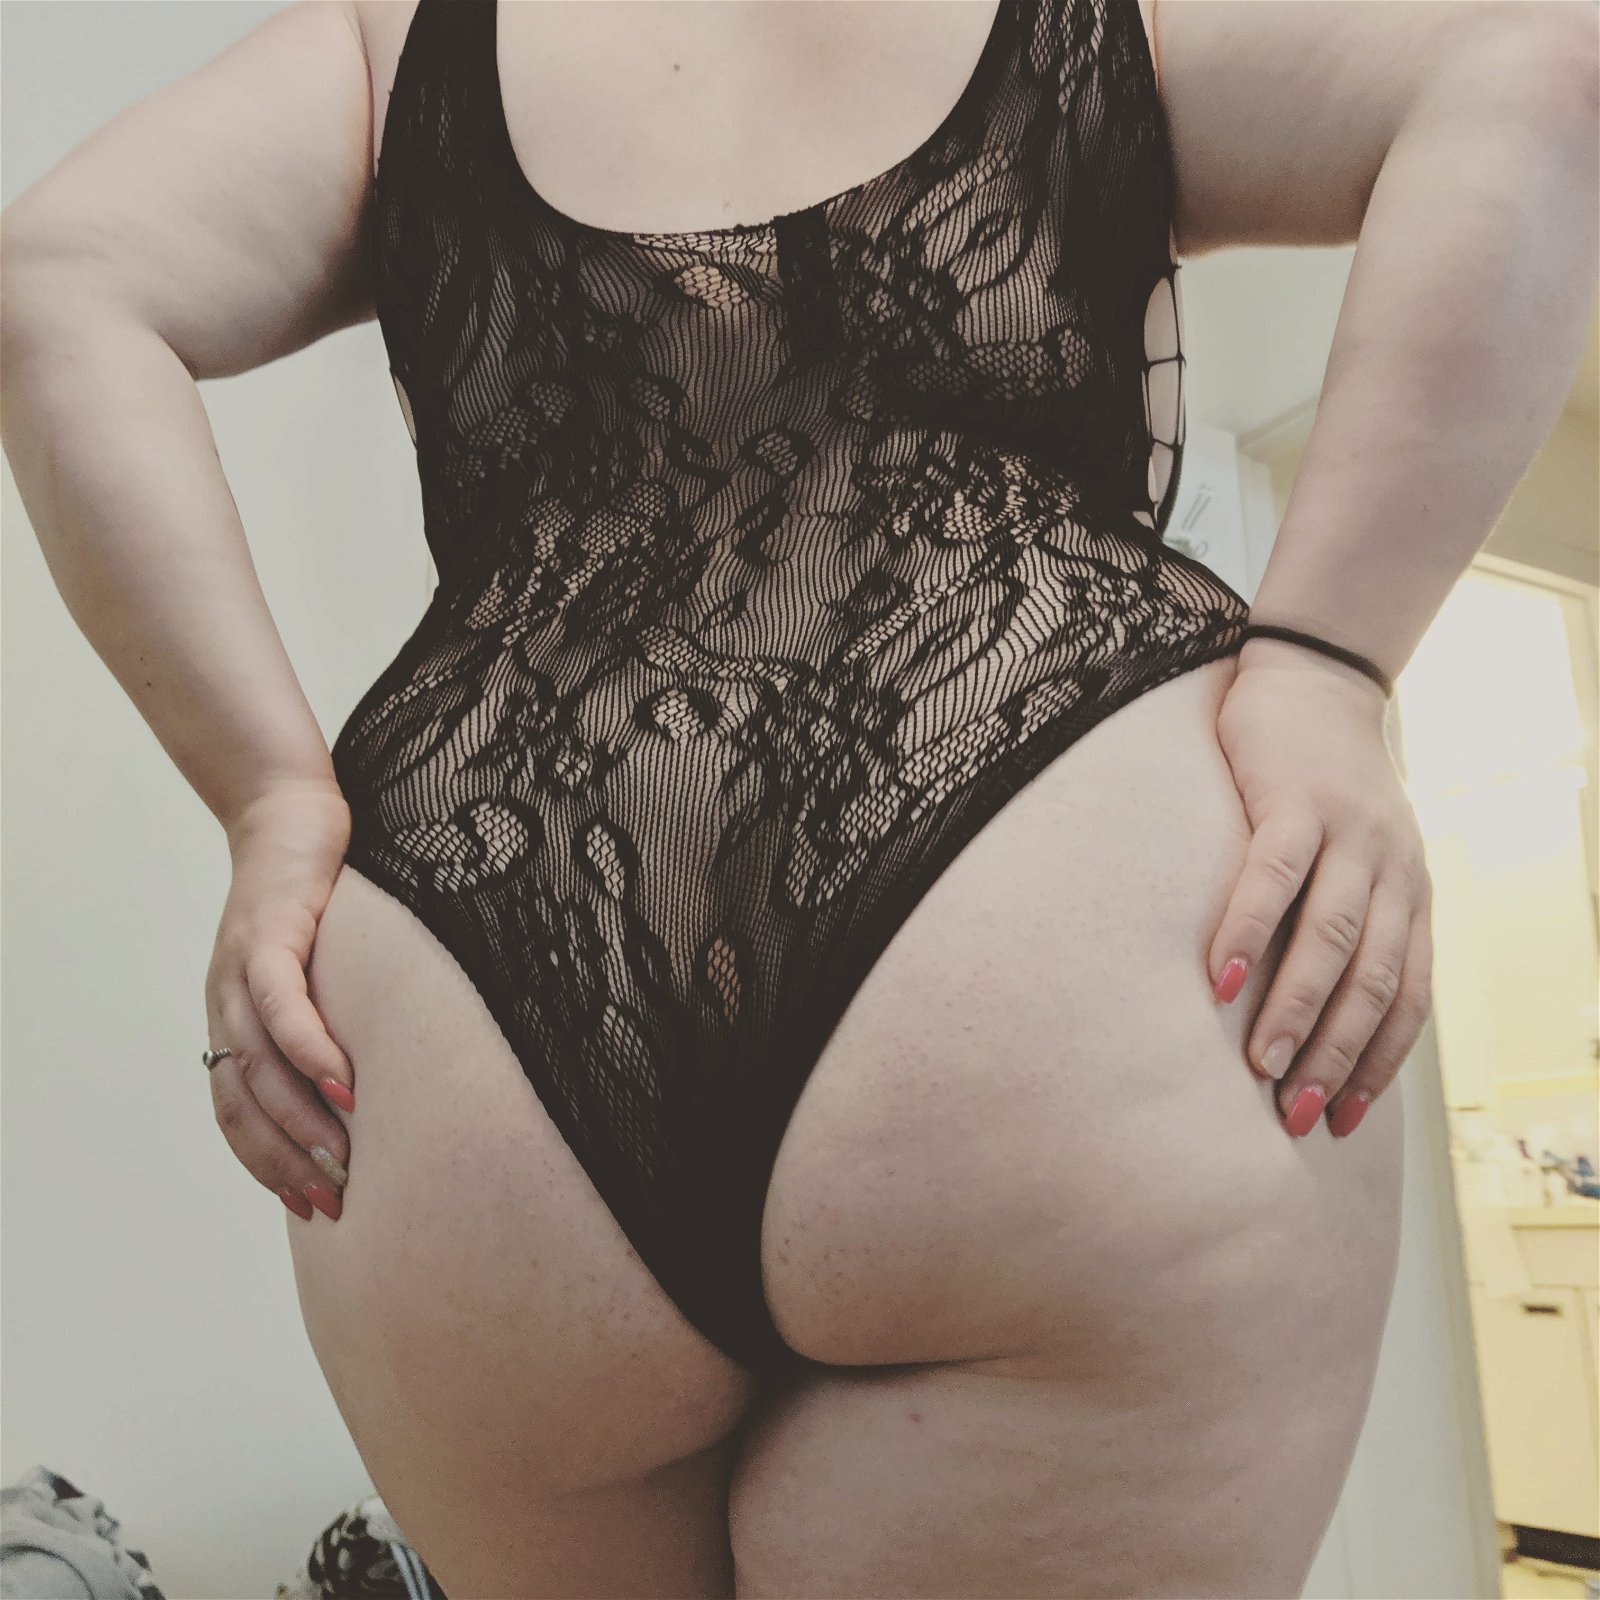 Photo by Maddisoncarver with the username @Maddisoncarver,  August 26, 2020 at 10:08 PM. The post is about the topic Ass and the text says 'Any chance you'd like to subscribe to my onlyfans? i promise i have plenty to offer!'